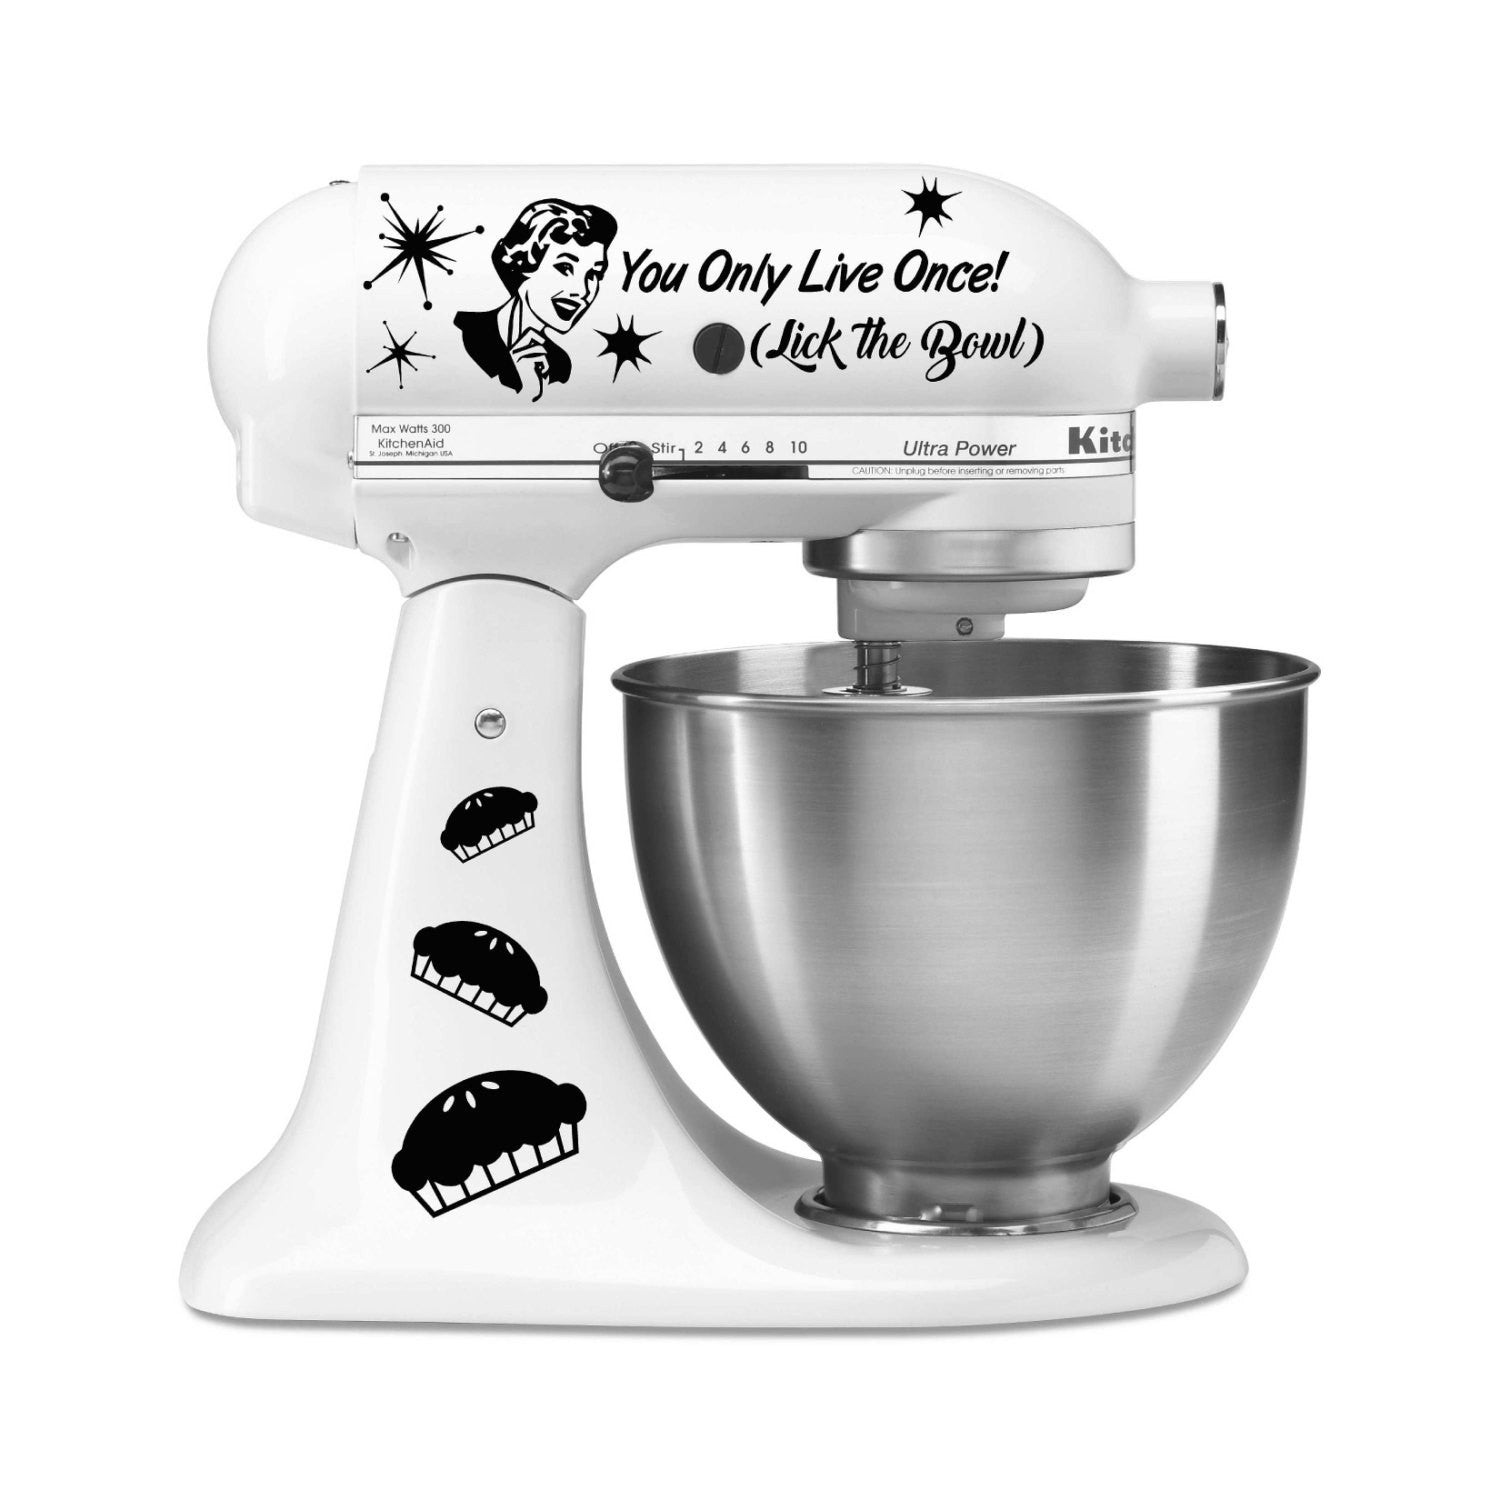 The Stand Mixer Decal Arrived - I Love It - The Art of Doing Stuff